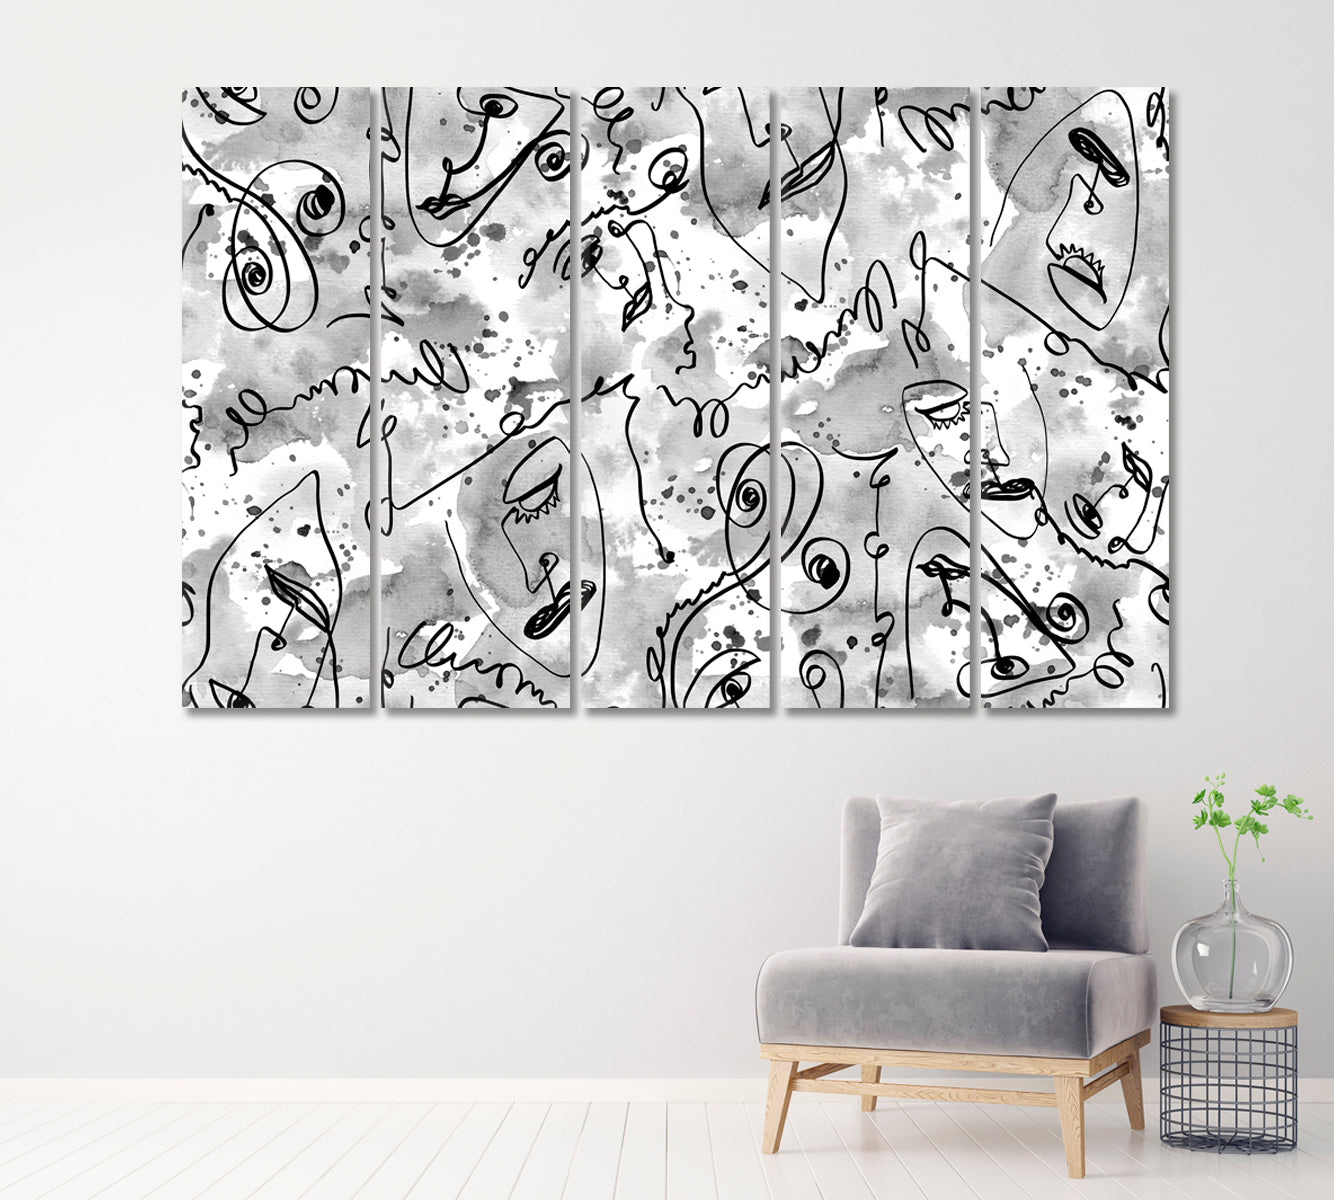 Abstract Faces with Splashes Ink Canvas Print ArtLexy 5 Panels 36"x24" inches 